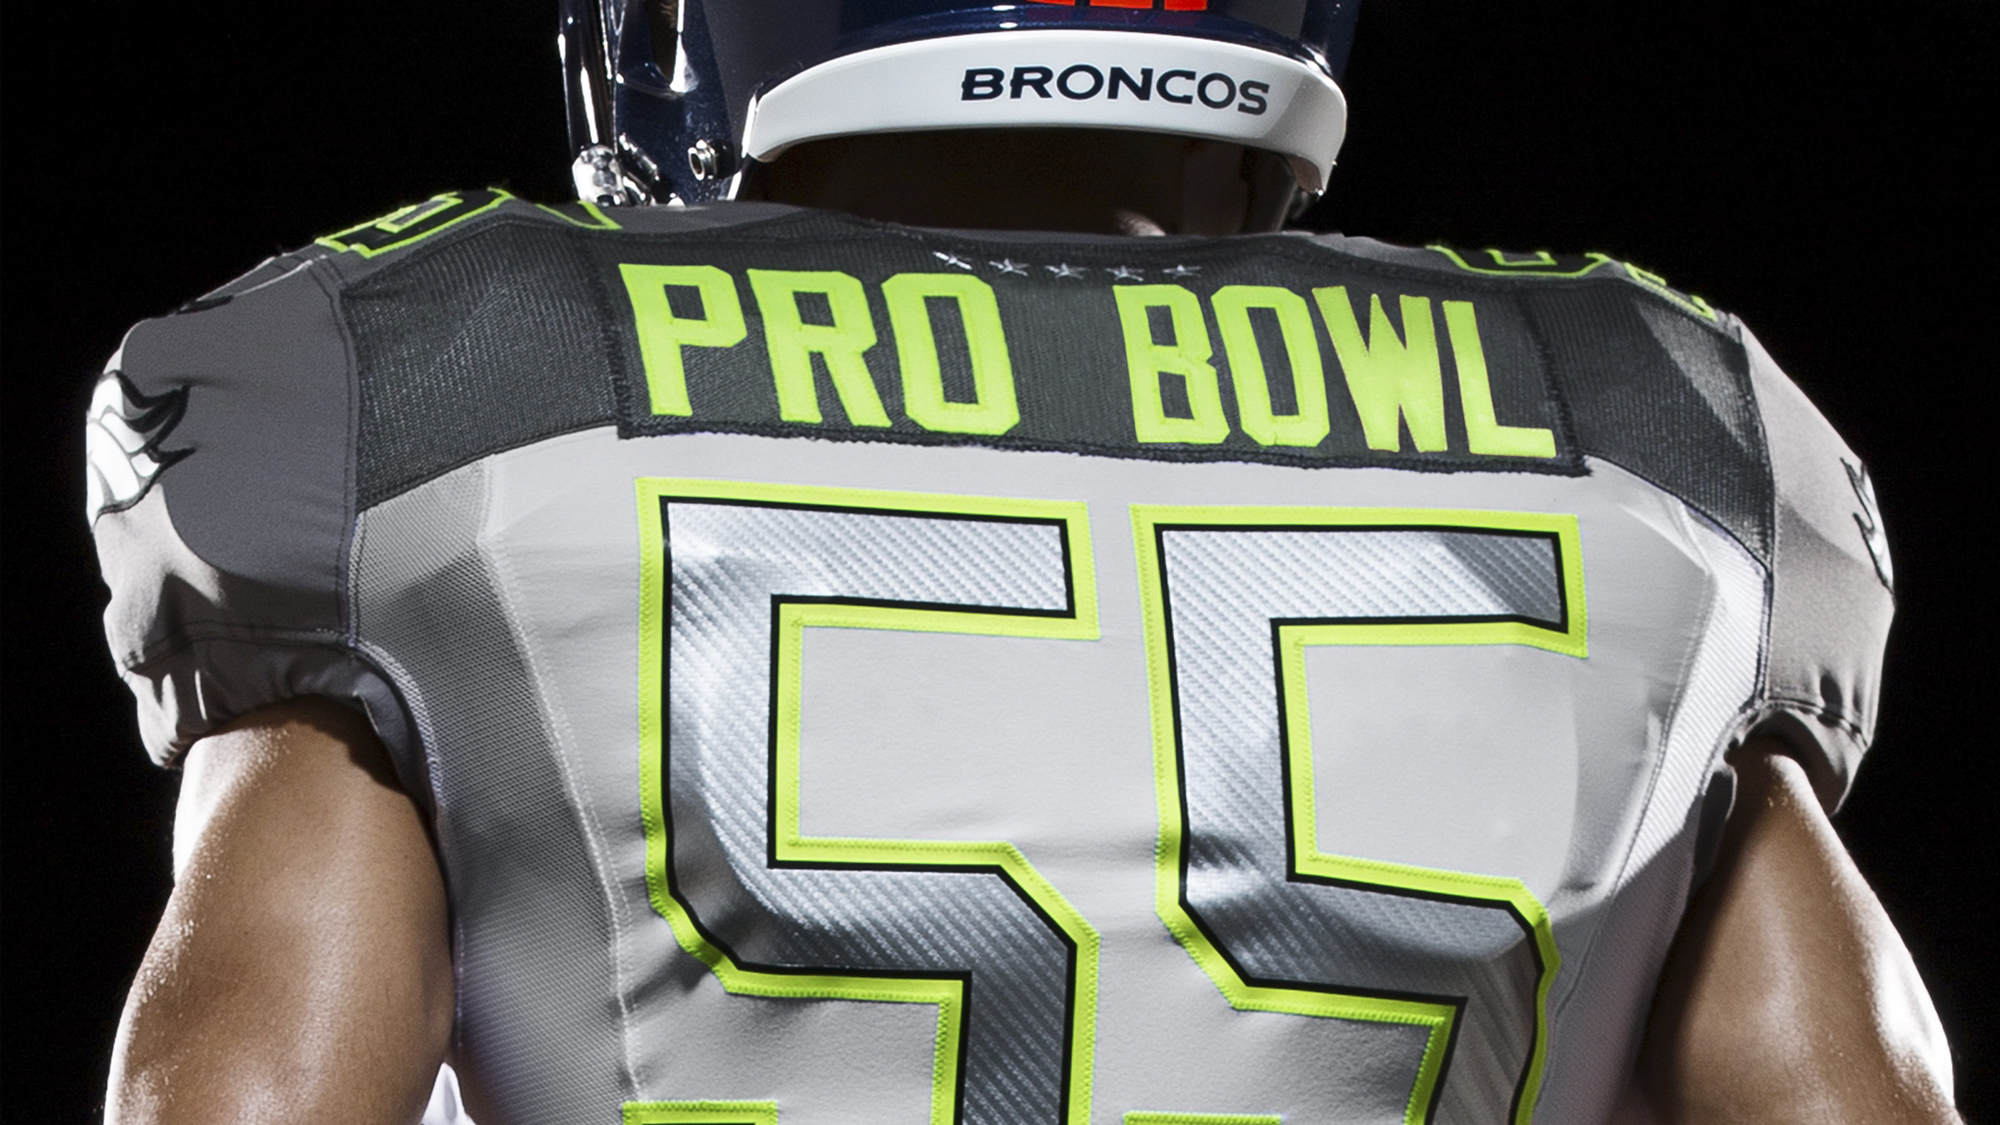 These are the uniforms players will wear in the Pro Bowl